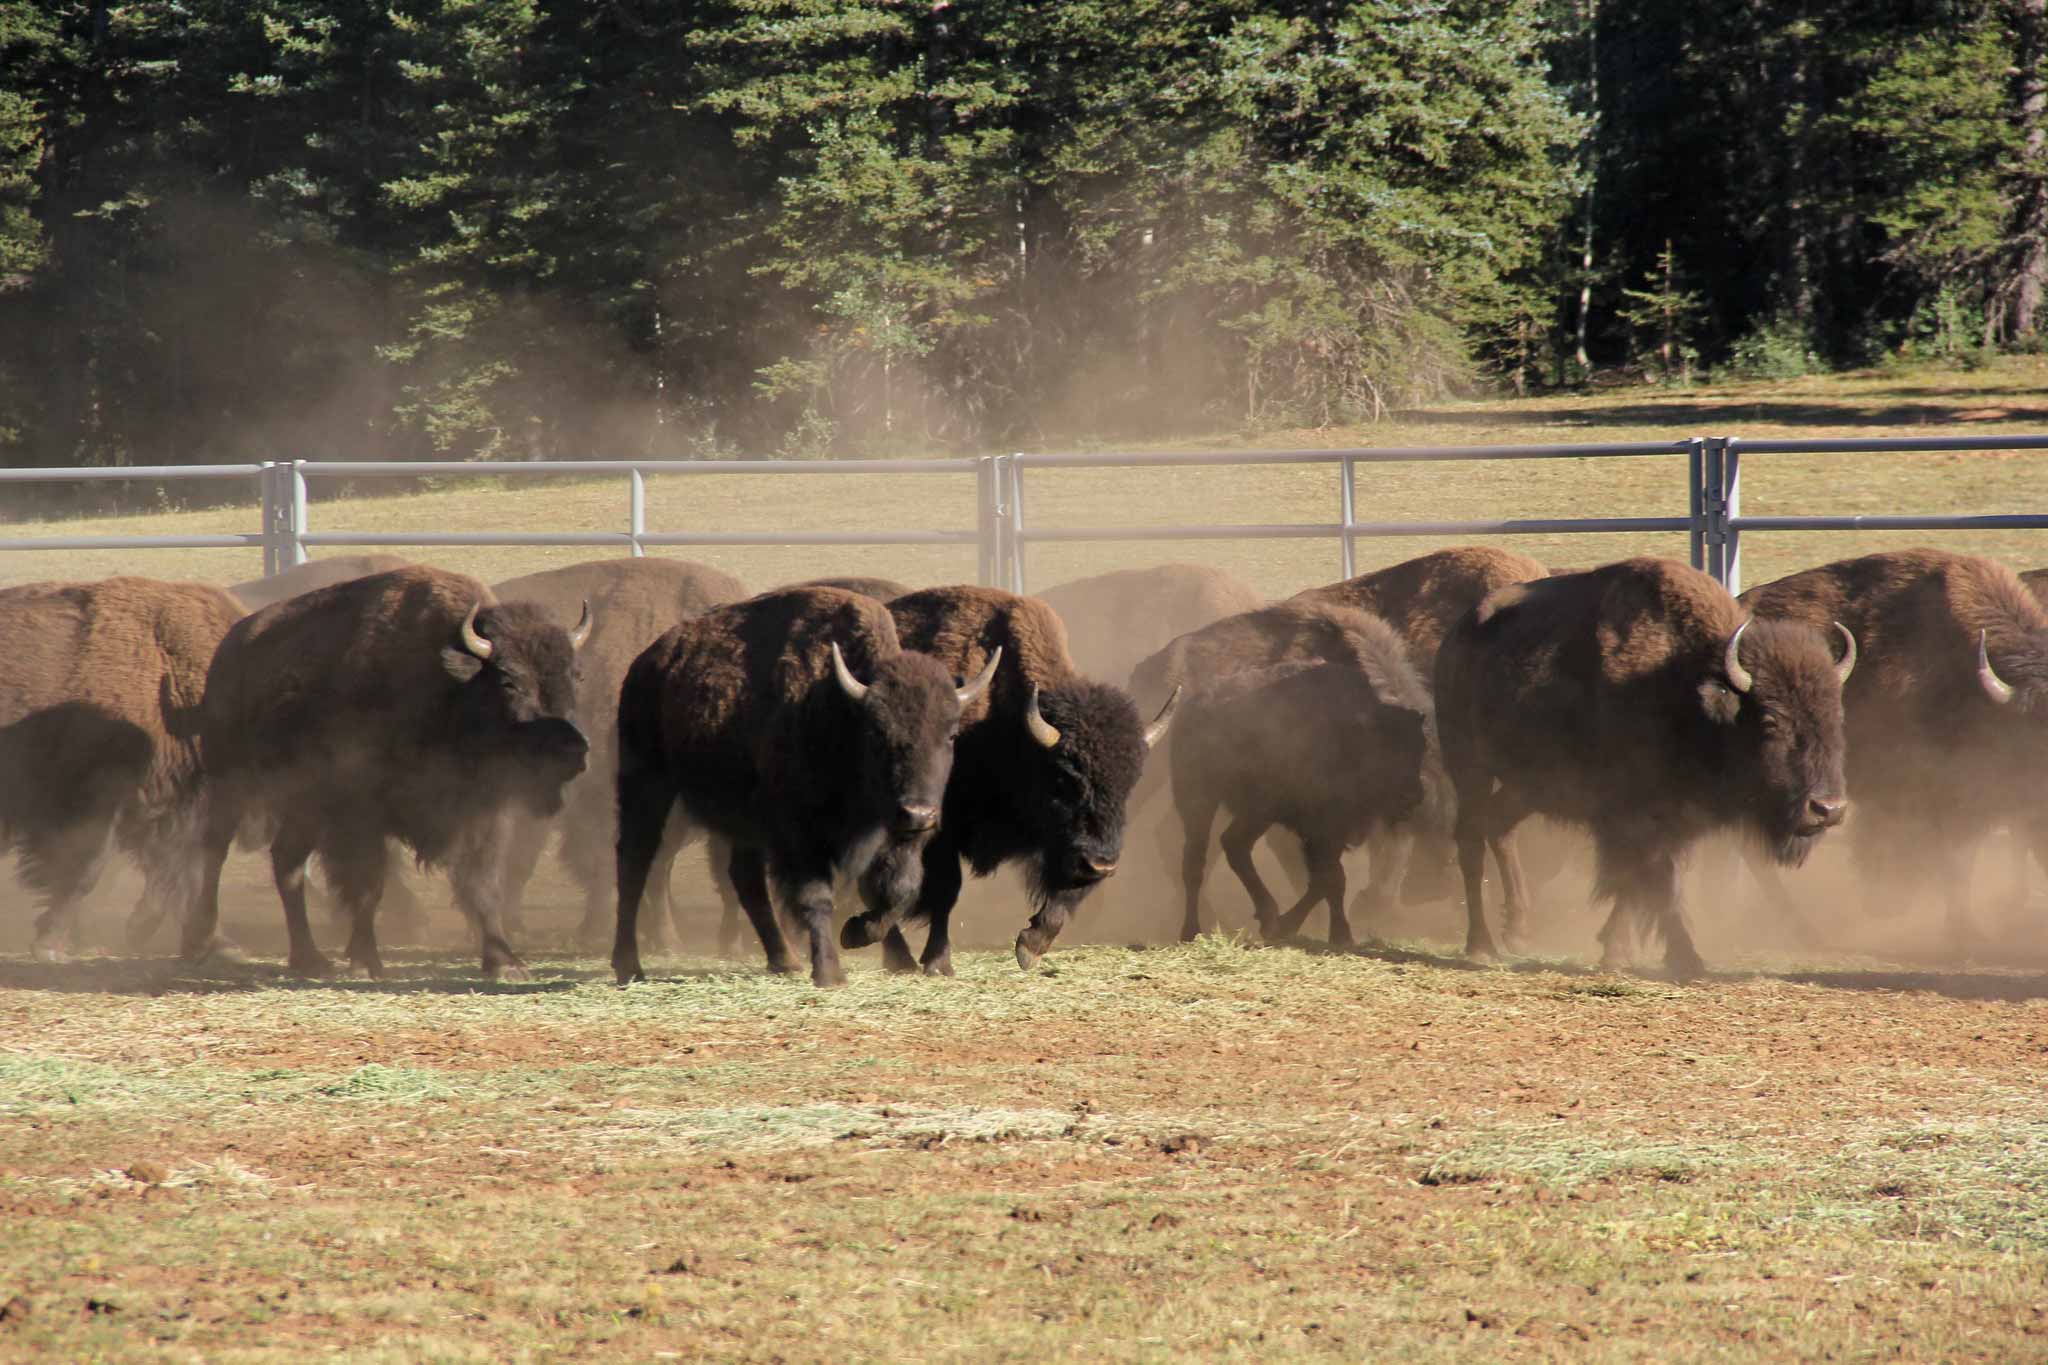 These bison were captured and transferred to the InterTribal Buffalo Council.